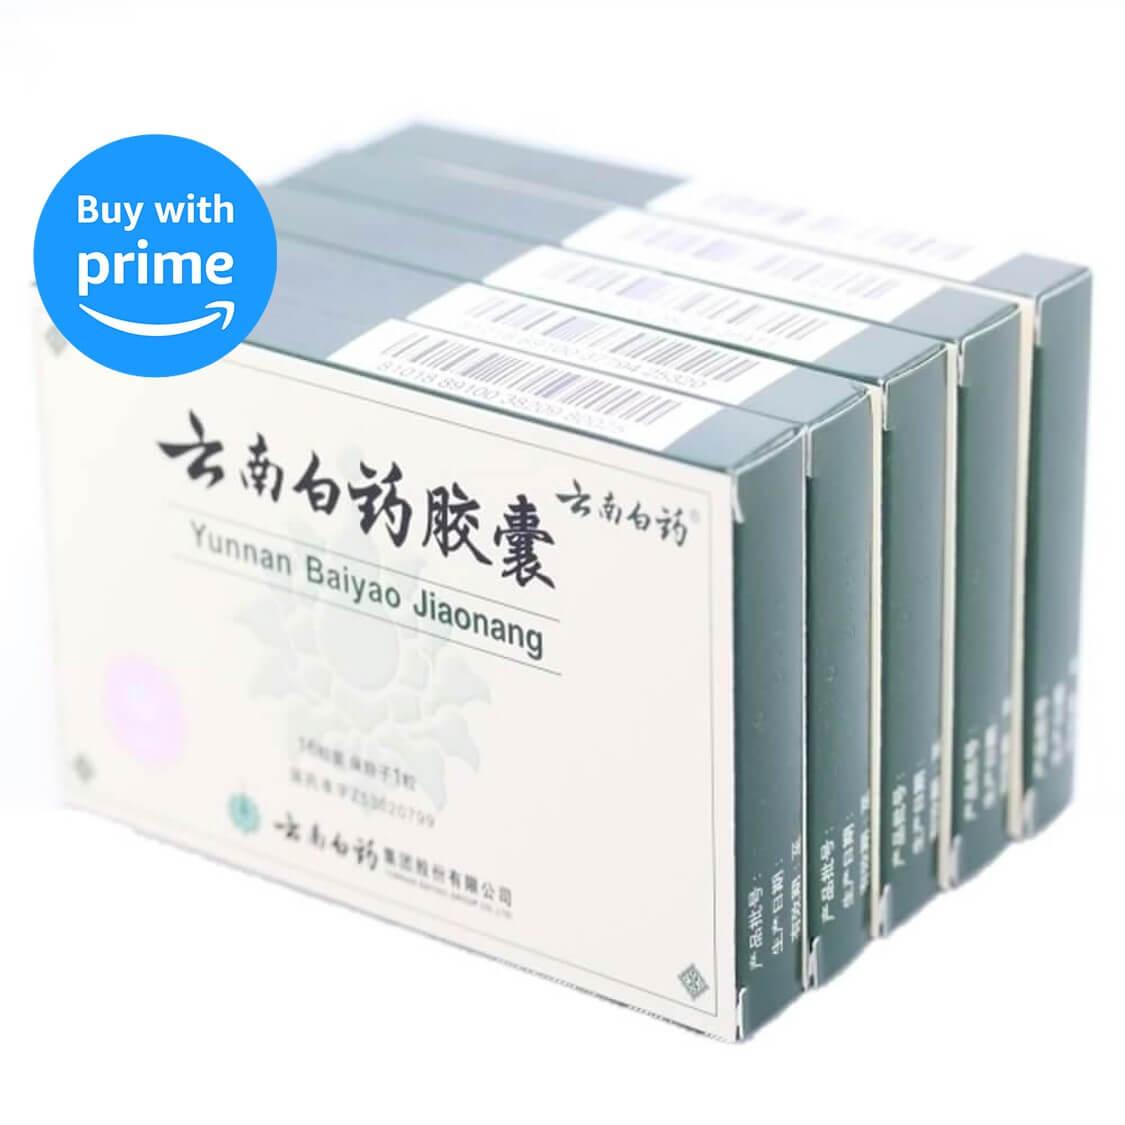 5 Boxes Yunnan Baiyao Capsules (16 Capsules) Buy With Prime - Buy at New Green Nutrition